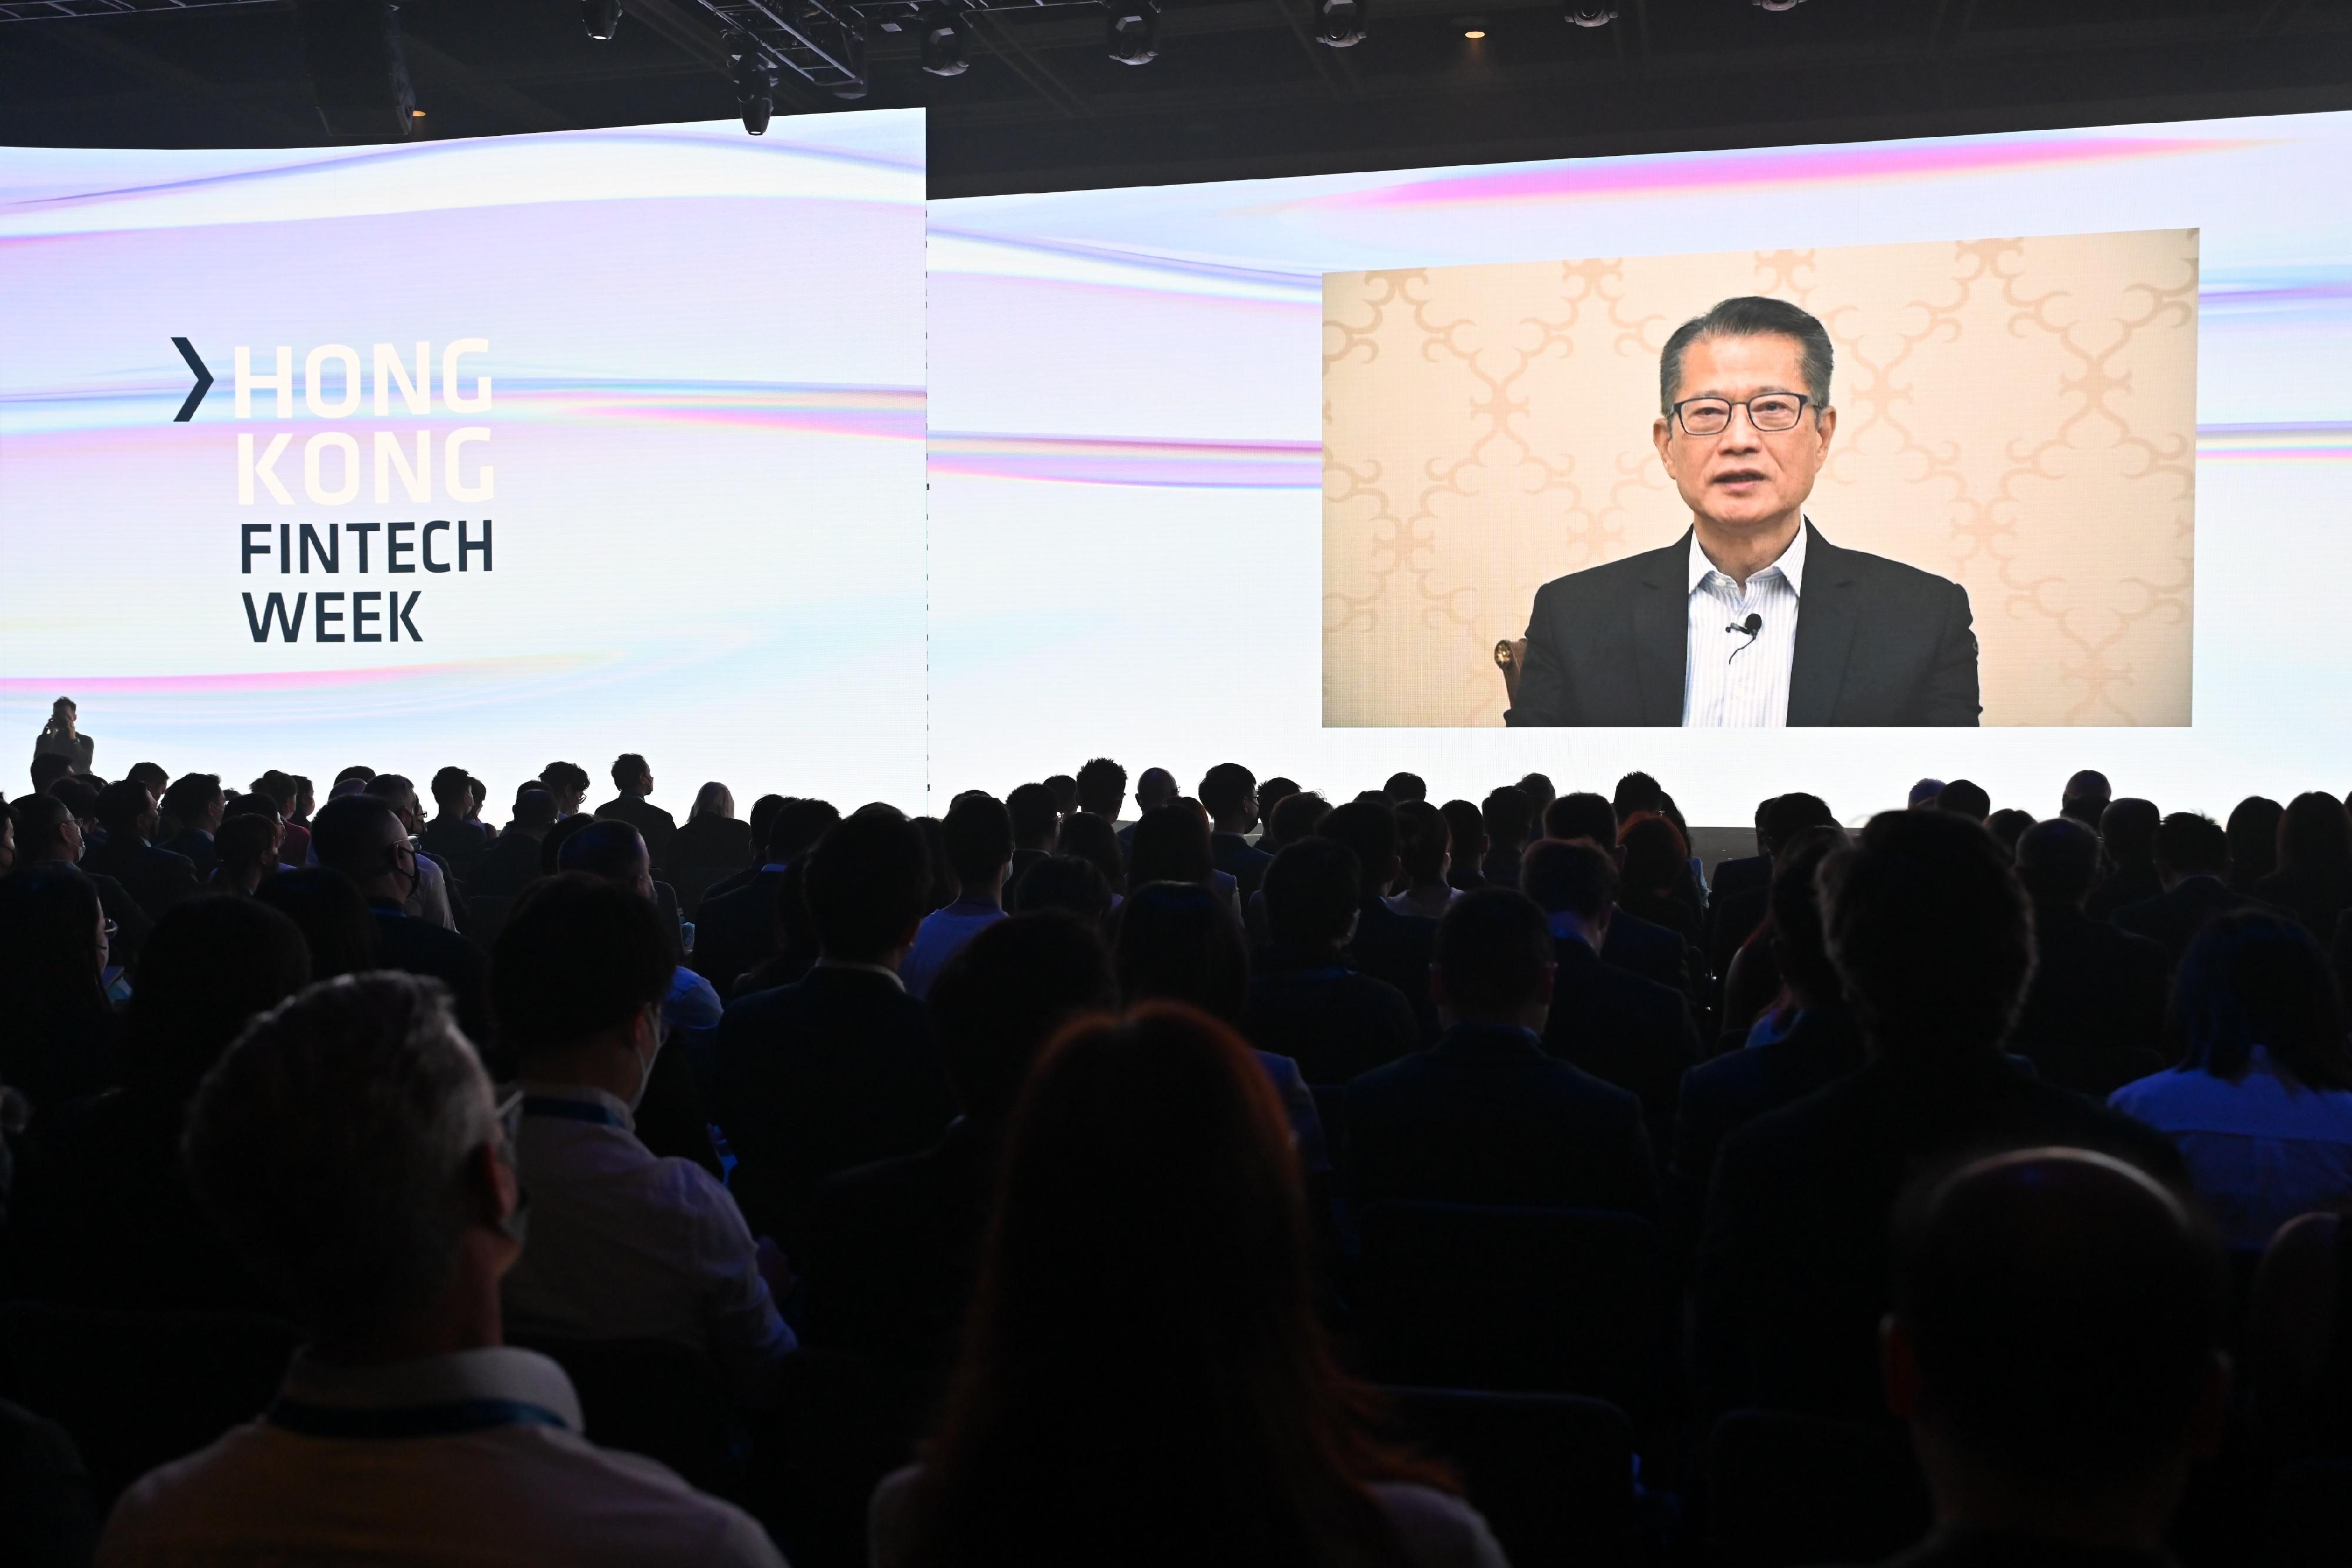 The five-day Hong Kong FinTech Week 2022 attracted over 30 000 visitors and more than five million online views from over 95 economies. Photo shows the Financial Secretary, Mr Paul Chan, sharing opening remarks in a pre-recorded video on October 31, in which he highlighted the rapid growth of Hong Kong's fintech sector in recent years.